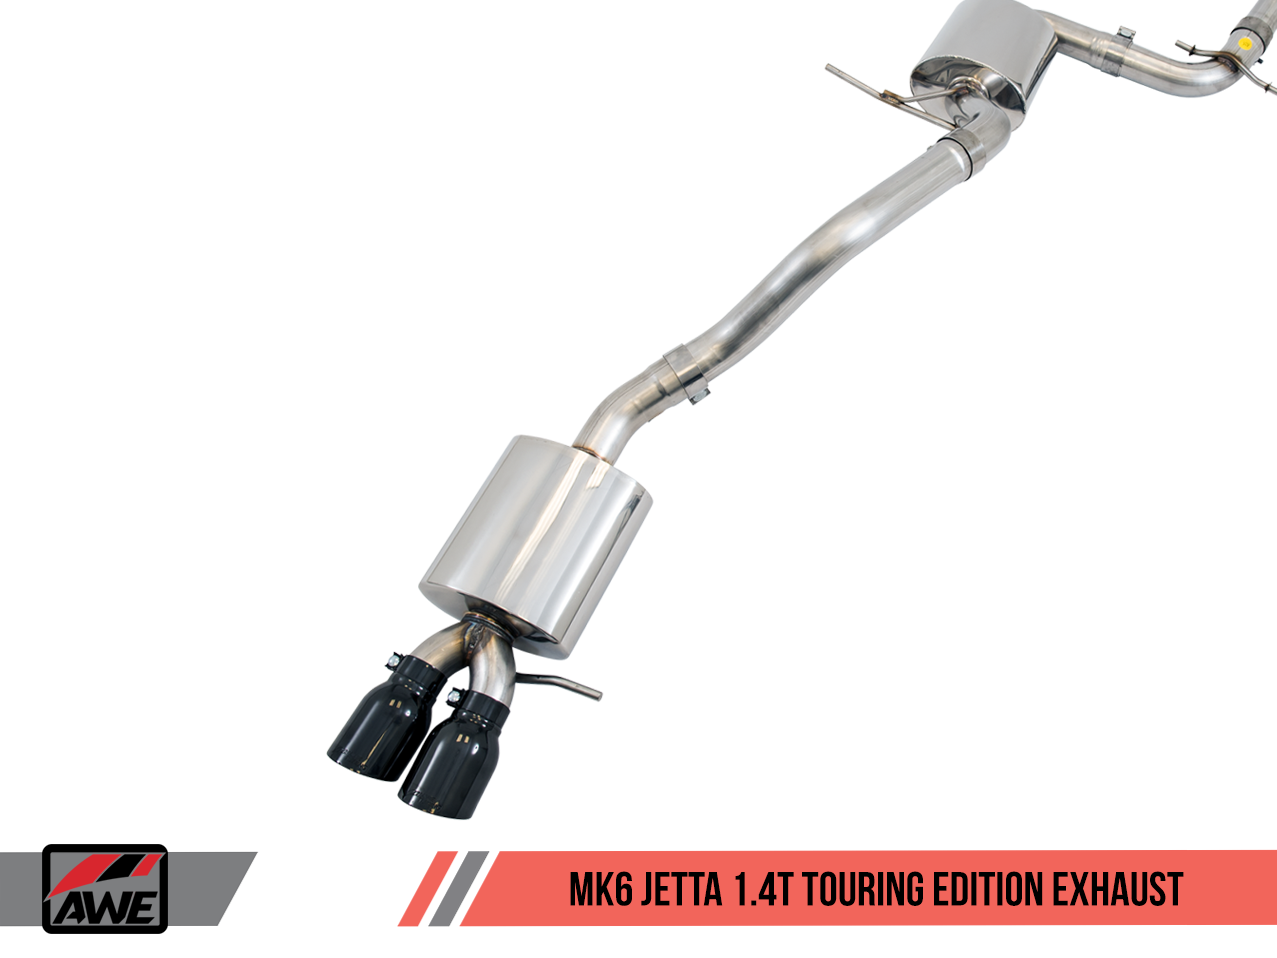 AWE Touring Edition Exhaust for MK6 Jetta 1.4T - Motorsports LA